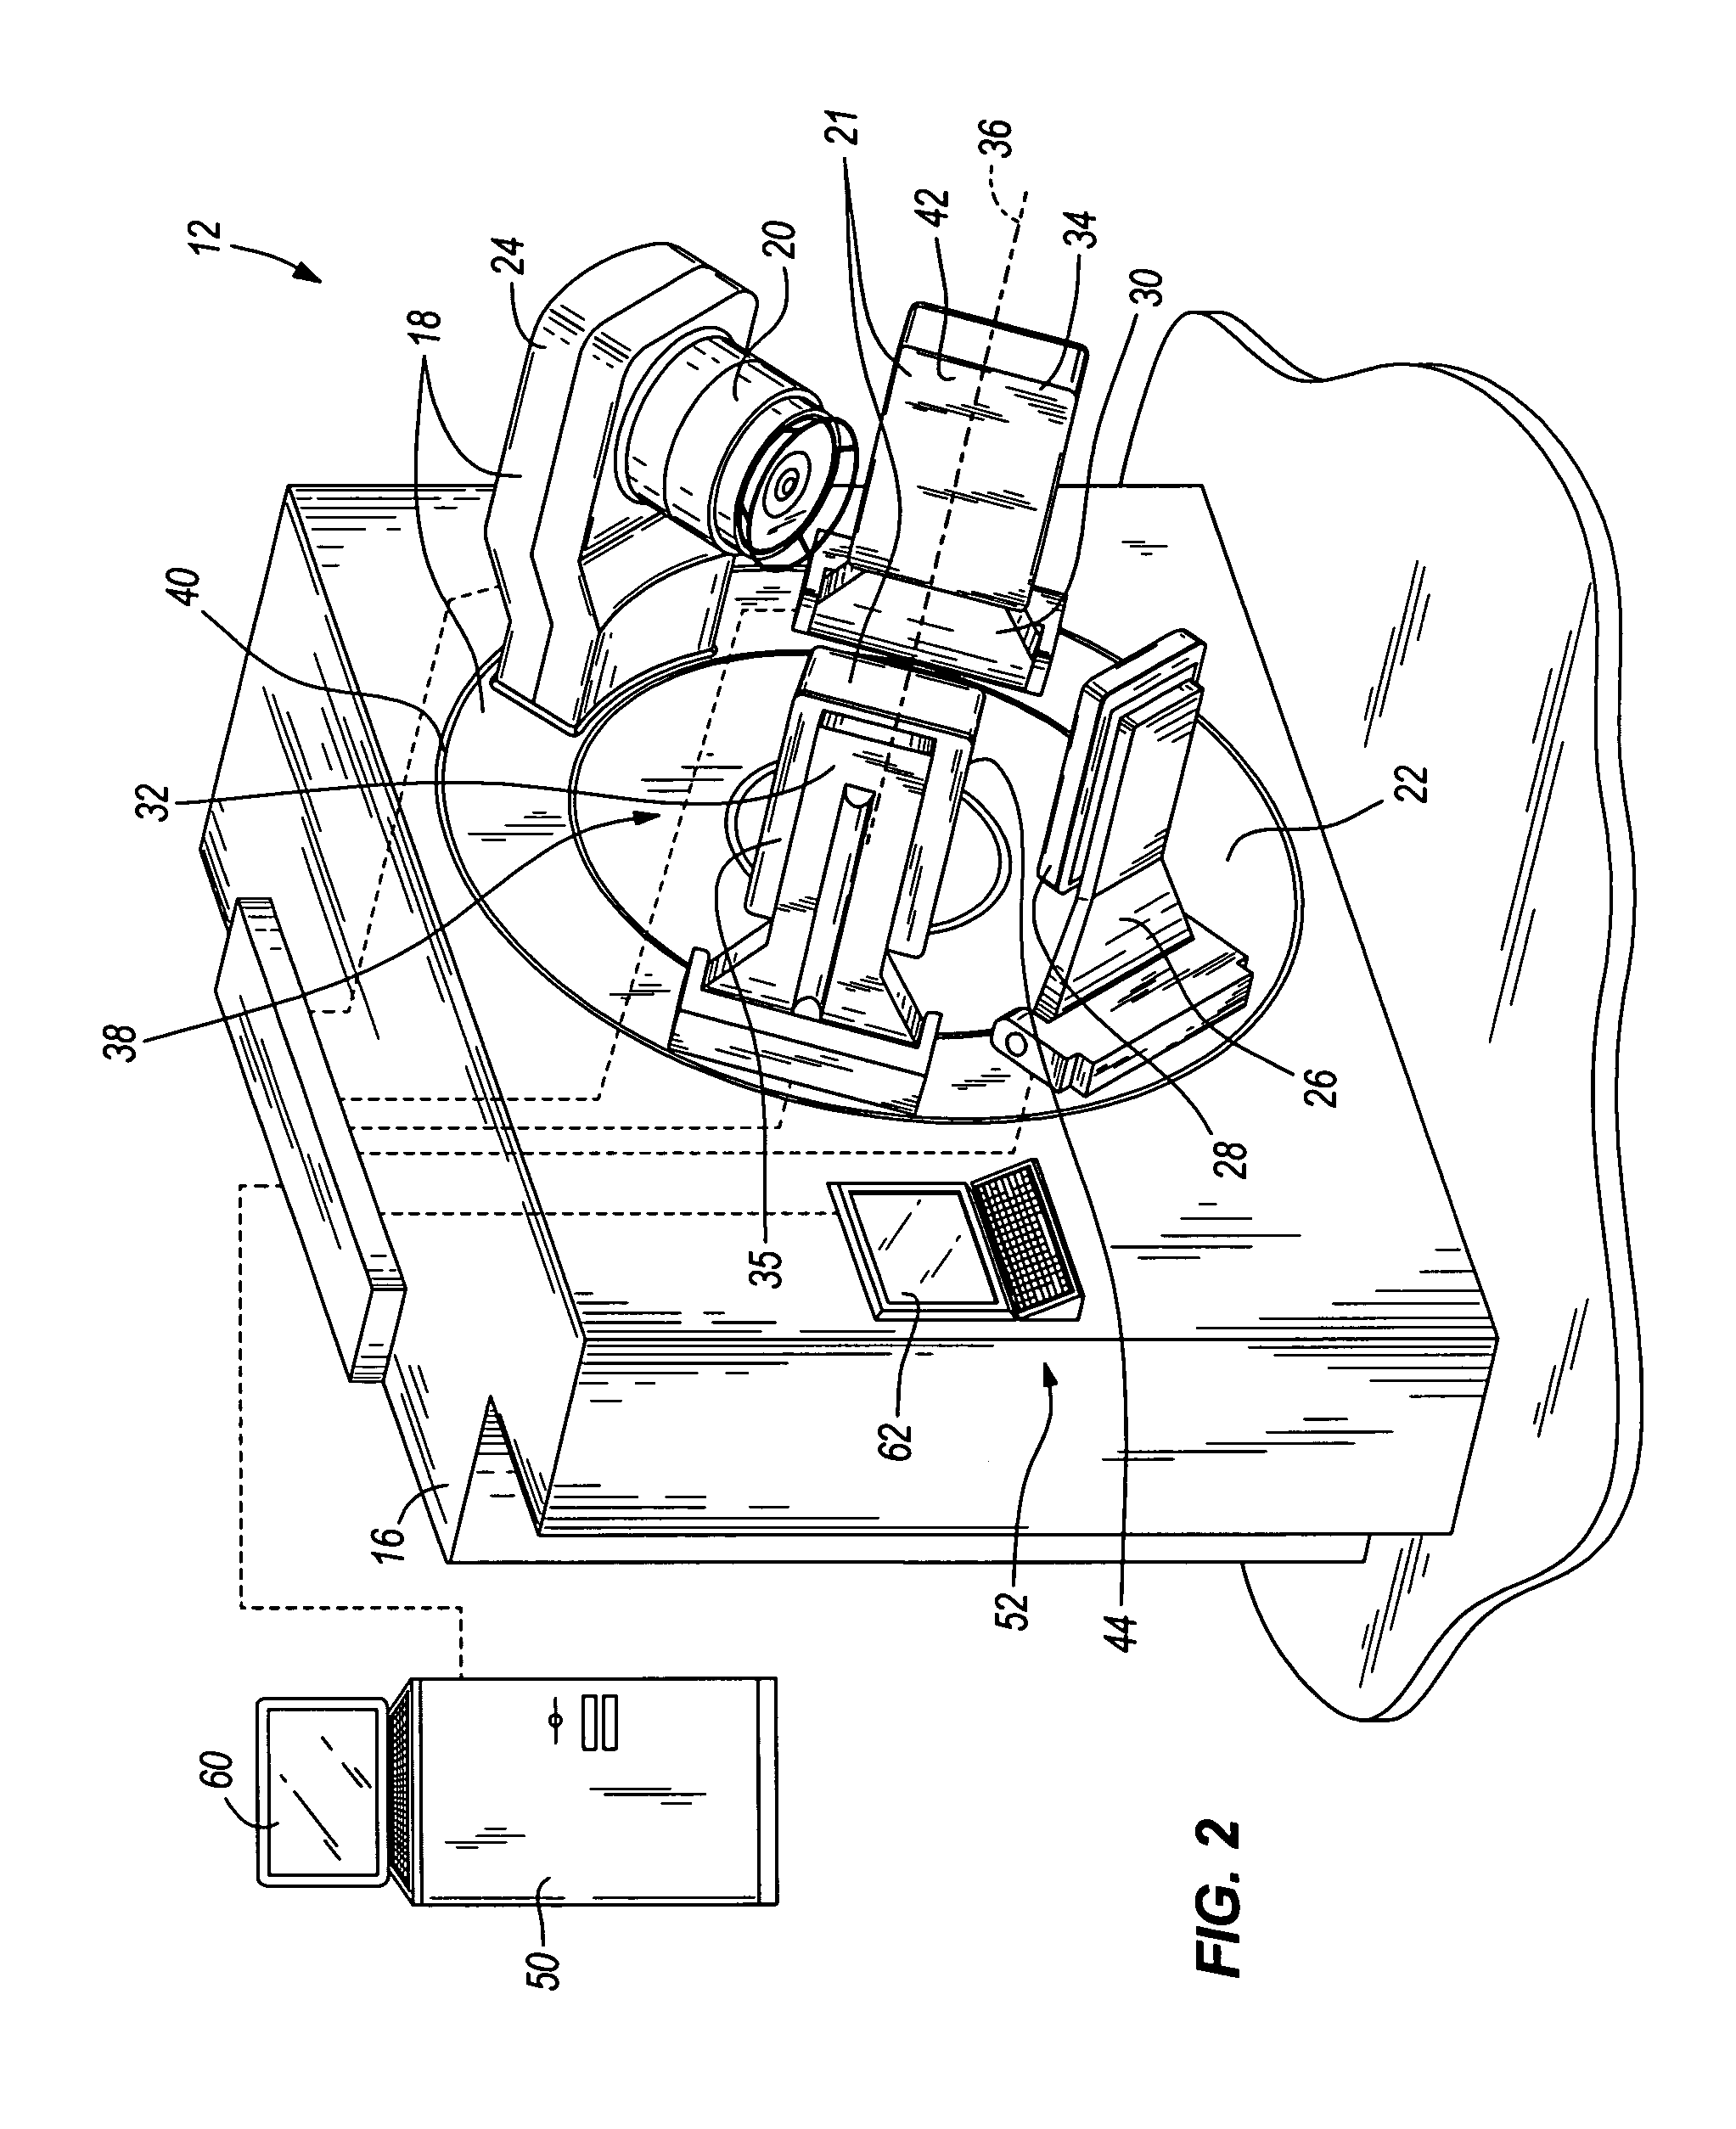 Image-guided medical intervention apparatus and method